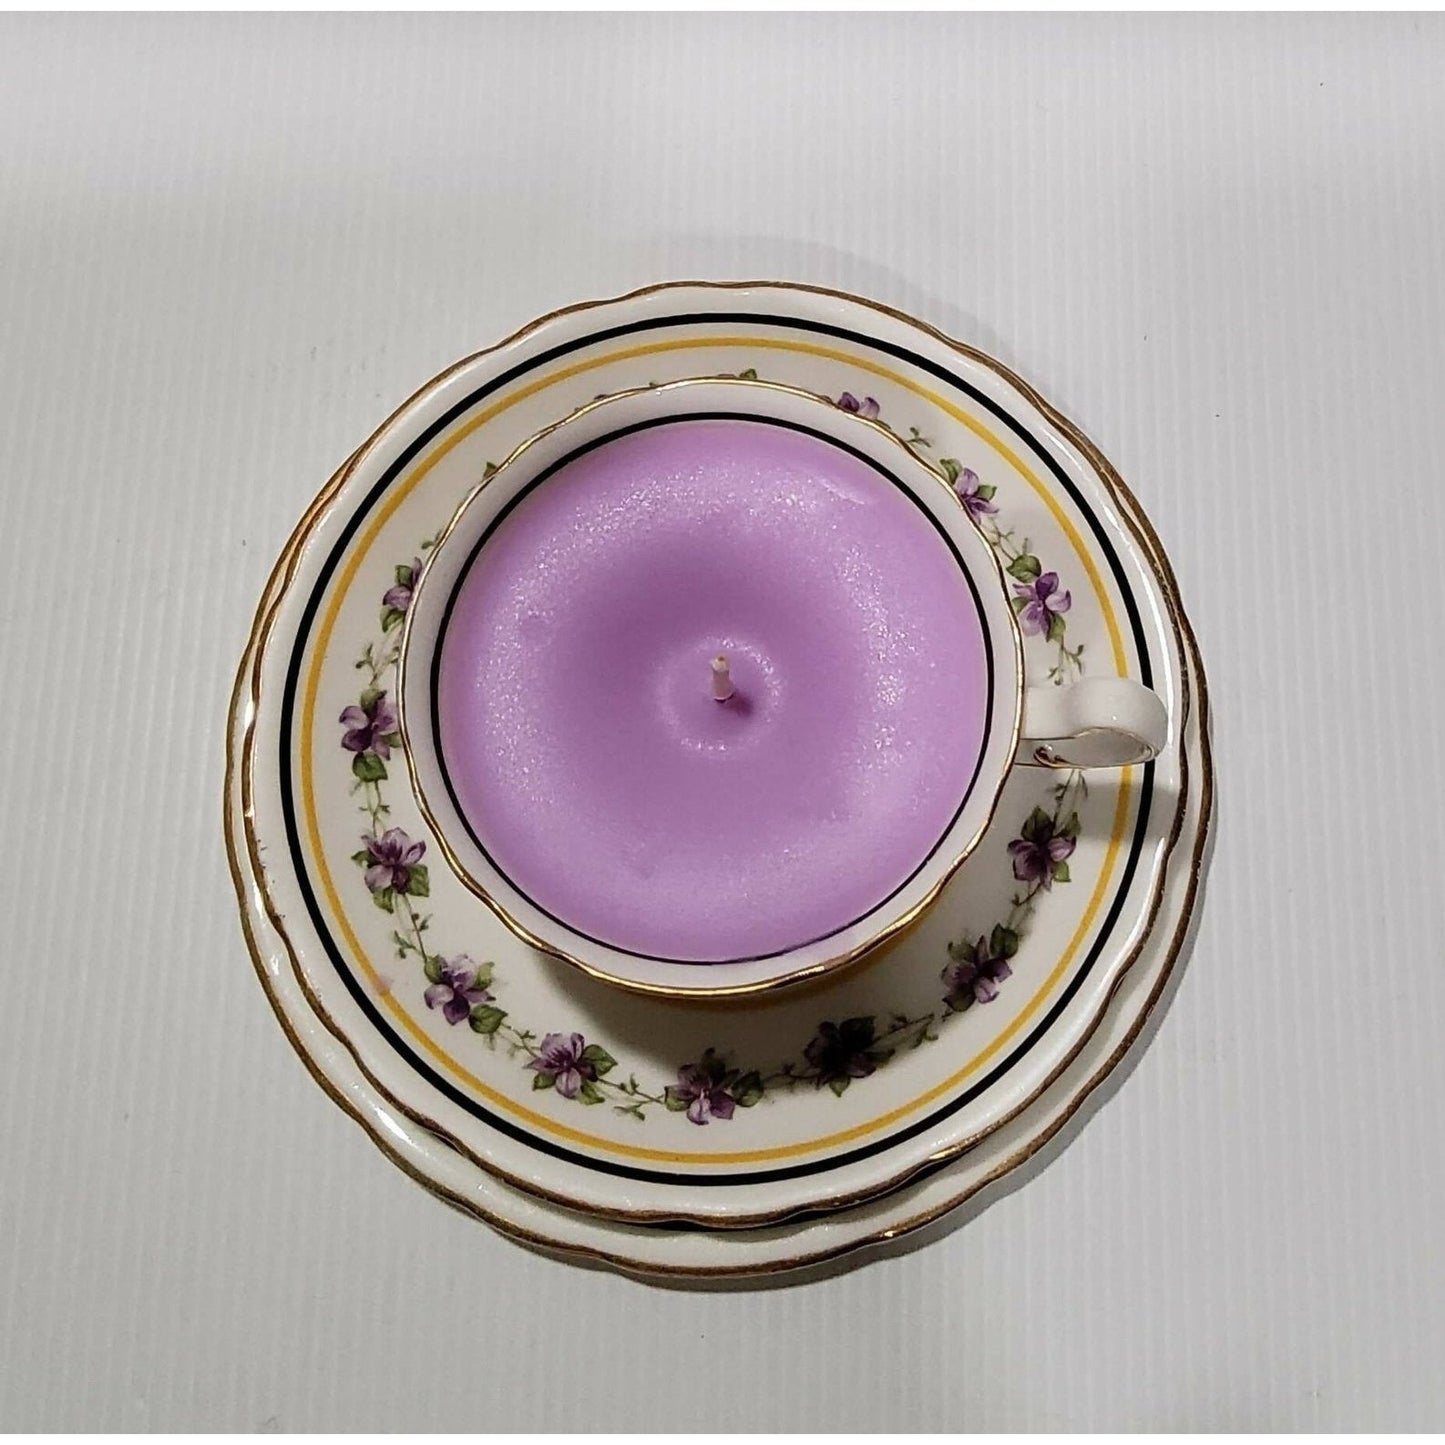 Teacup Candle - Handpoured Soy Candle - Royal Doulton - England - Vintage - Wisteria - Free Shipping - AMD Touring